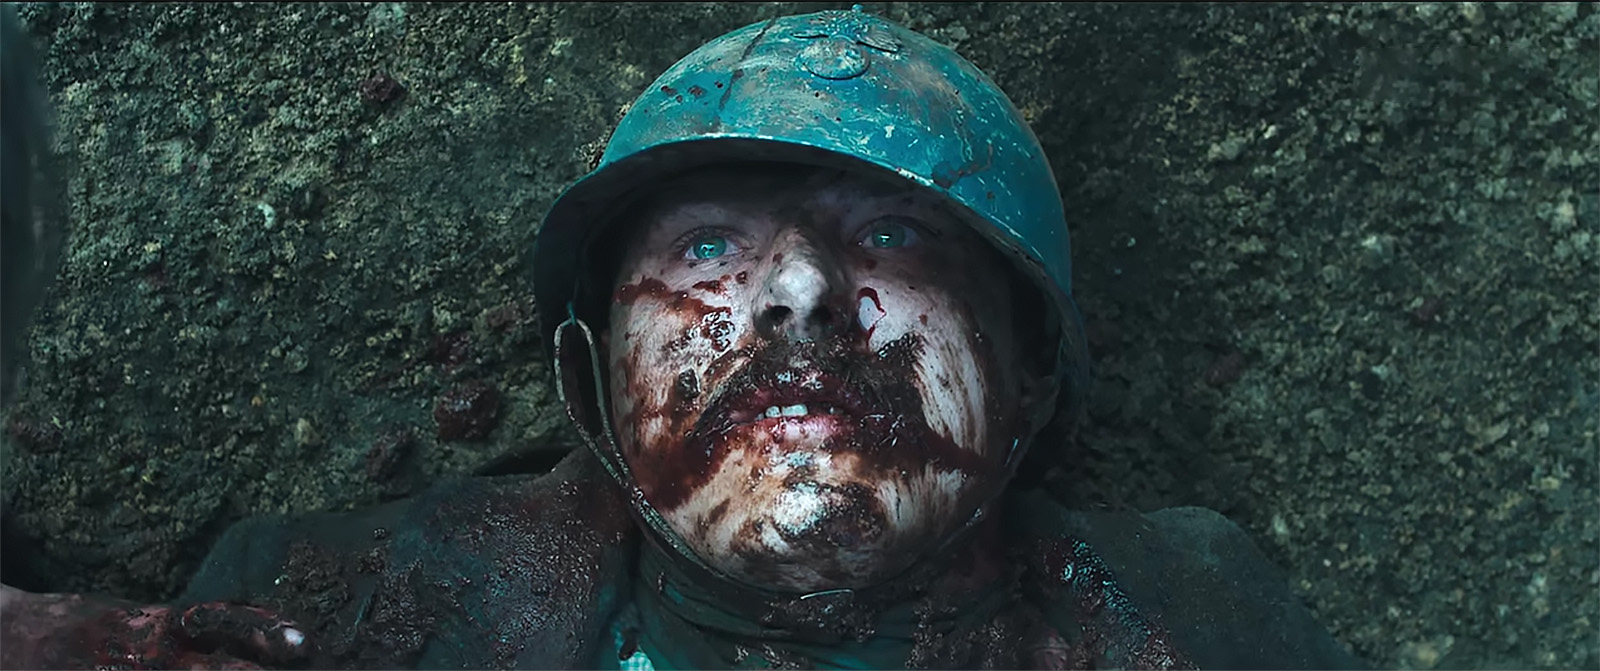 Realistic makeup showed the effects of war in All Quiet on the Western Front. © Reiner Bajo/Netflix